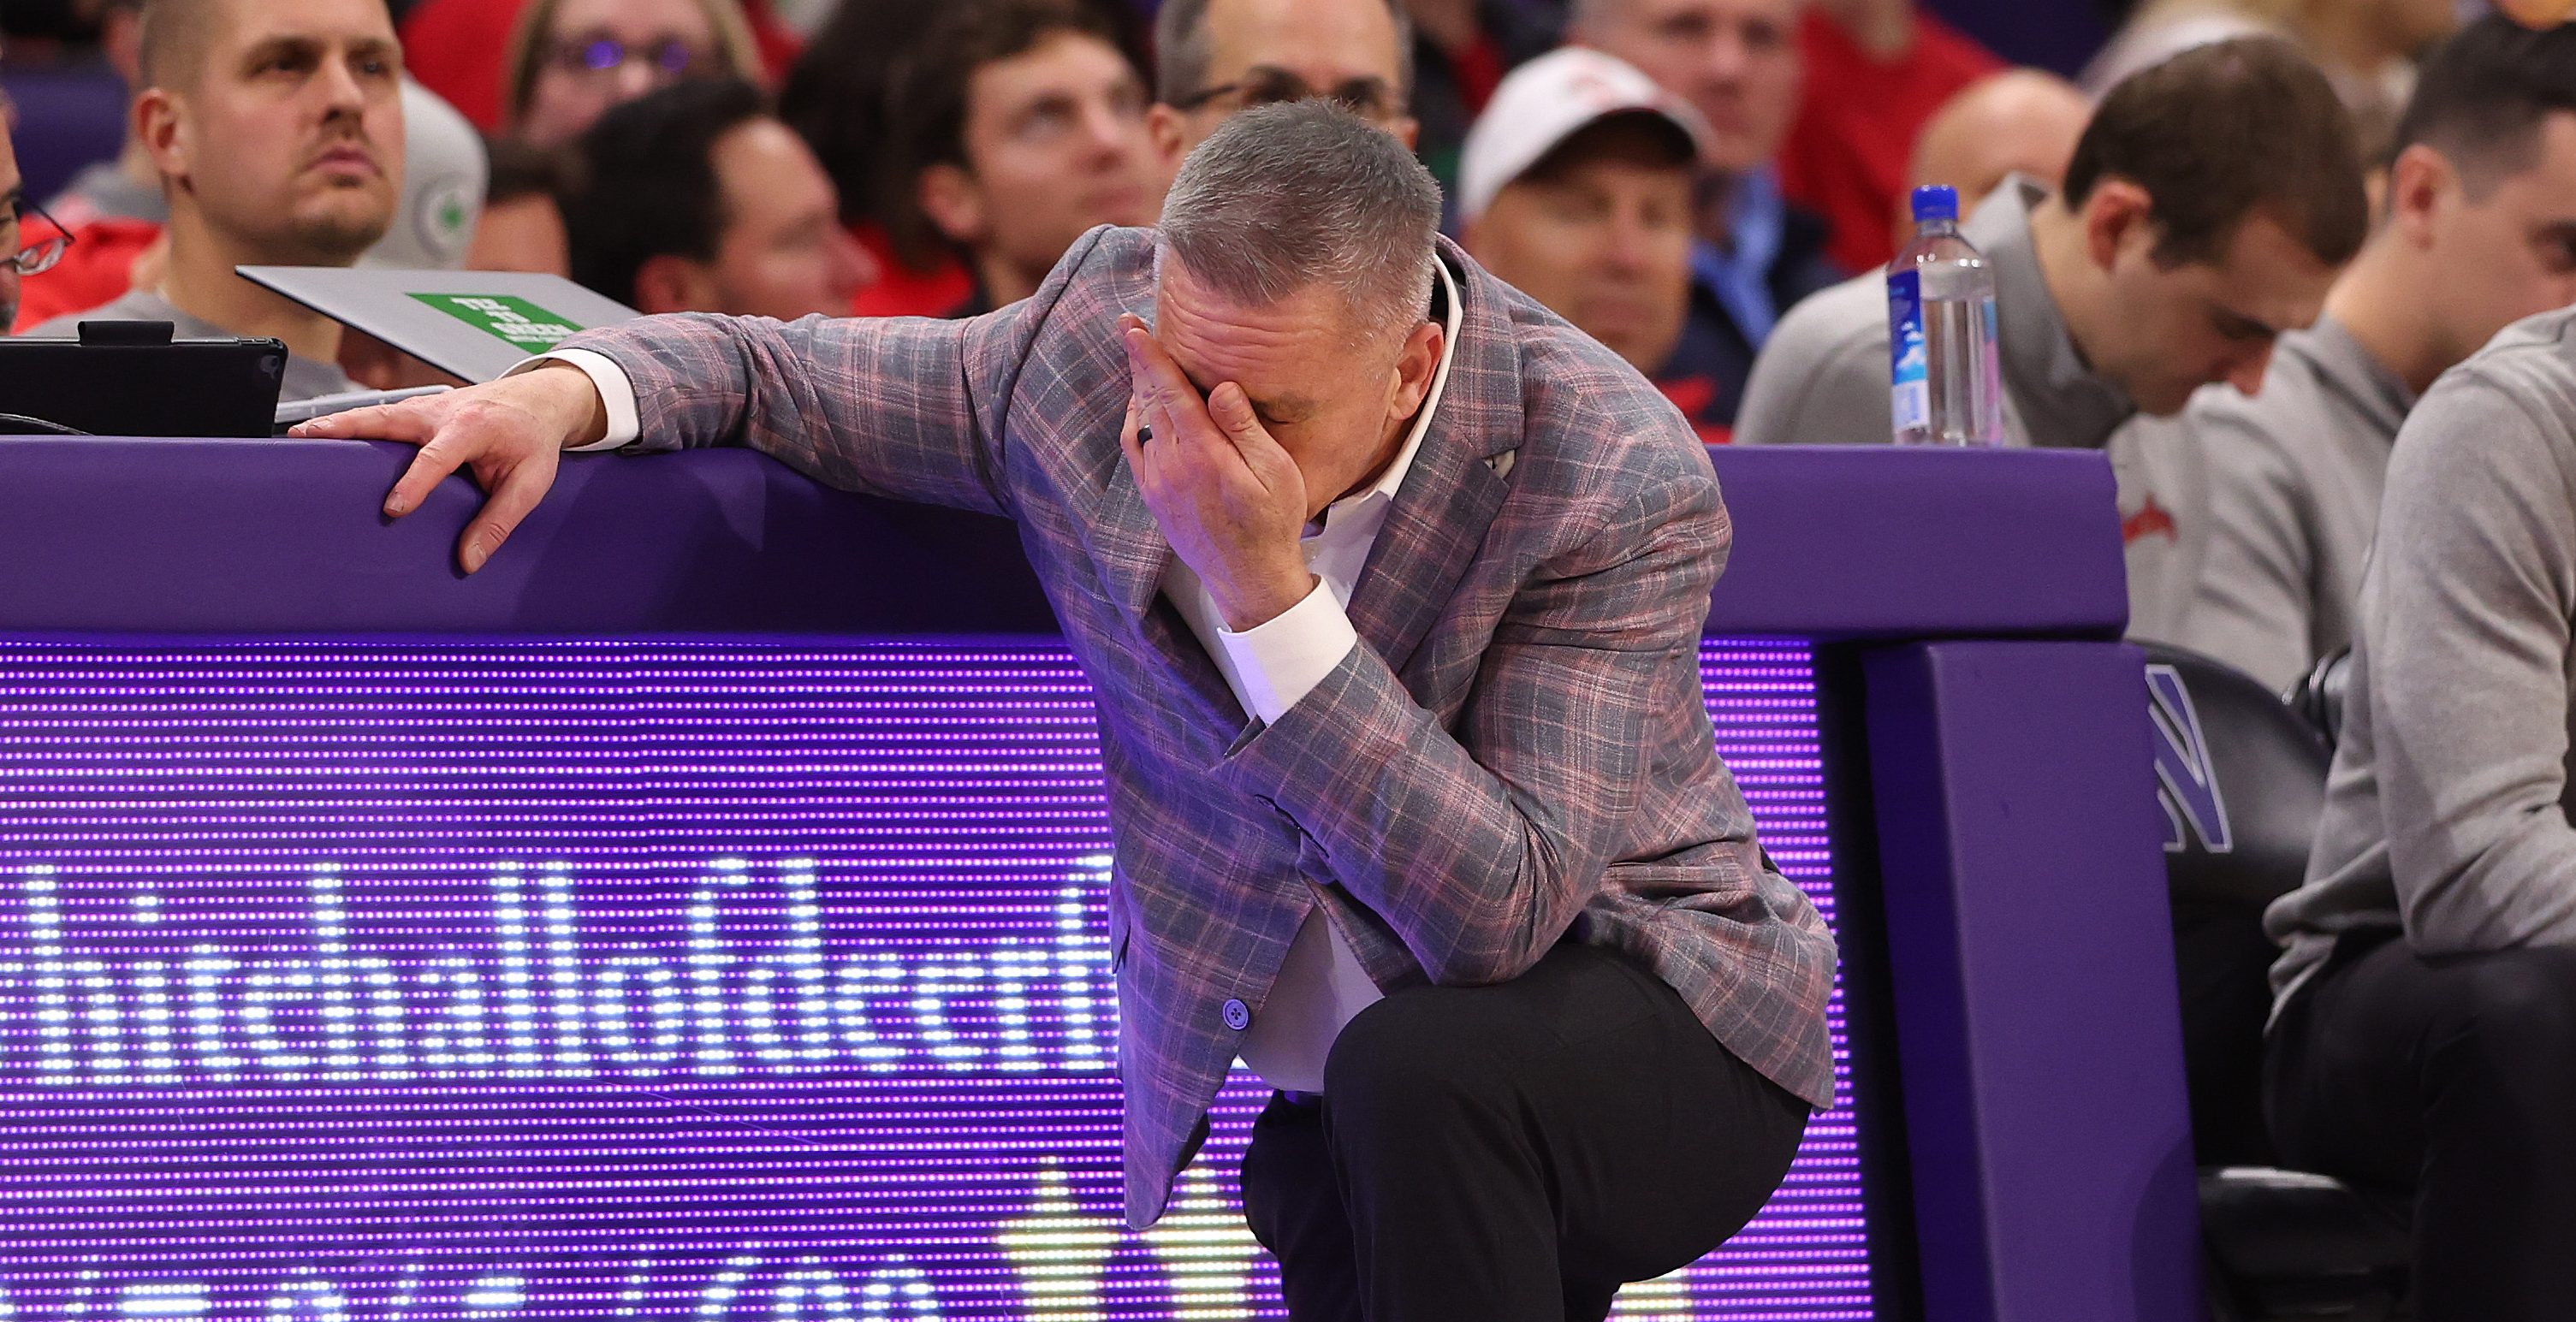 EVANSTON, ILLINOIS - JANUARY 27: Head coach Chris Holtmann of the Ohio State Buckeyes reacts against the Northwestern Wildcats during the second half at Welsh-Ryan Arena on January 27, 2024 in Evanston, Illinois.